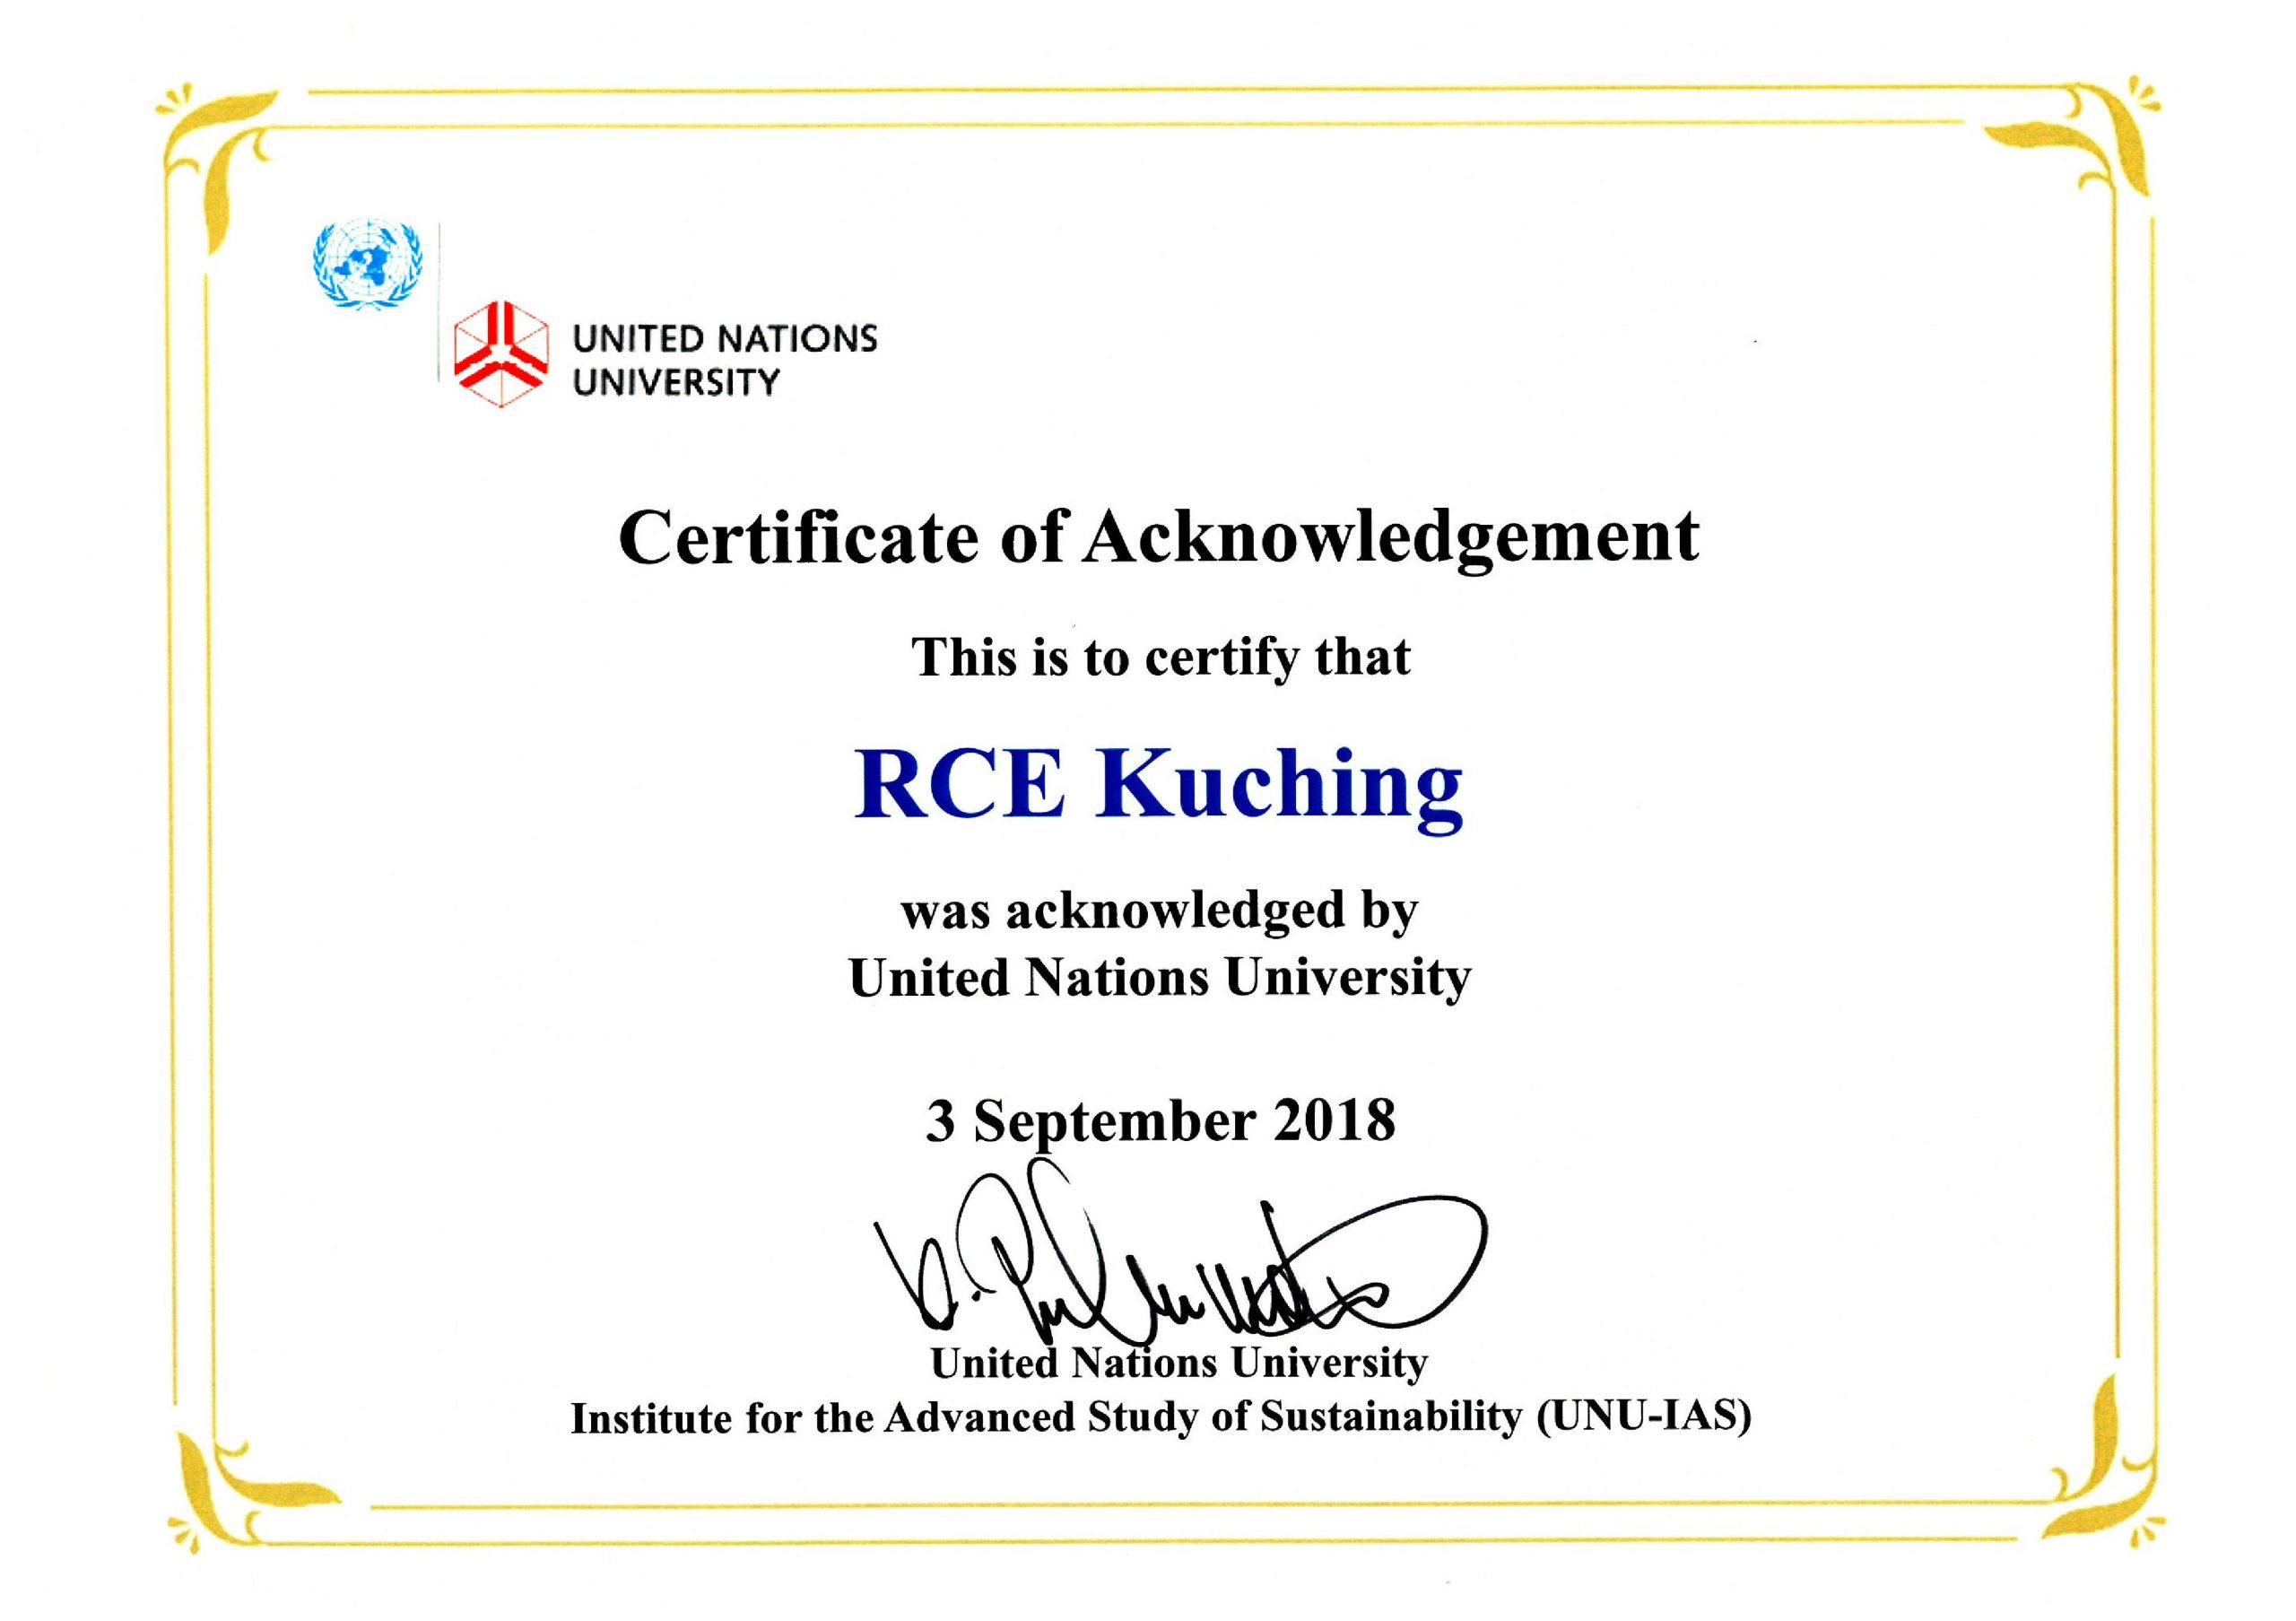 Certificate of Acknowledgement by United Nation University Institute for the Advanced Study of Sustainability (UNU-IAS)